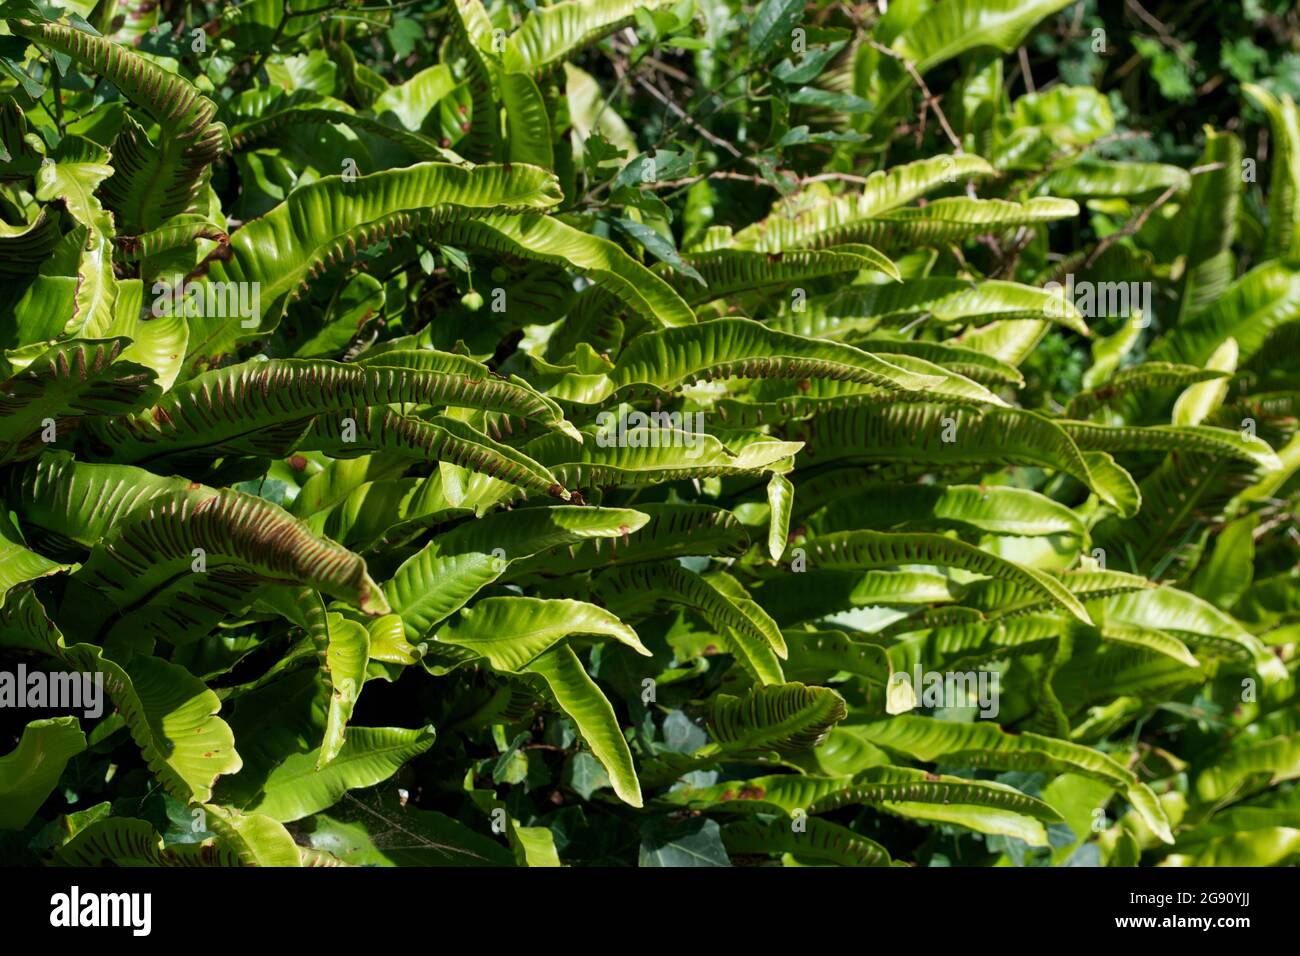 Close up of lush green Hart's Tongue Fern (Phyllitis scolopendrium) - wild fern with undivided fronds and large spore cases, leaves growing in bright Stock Photo